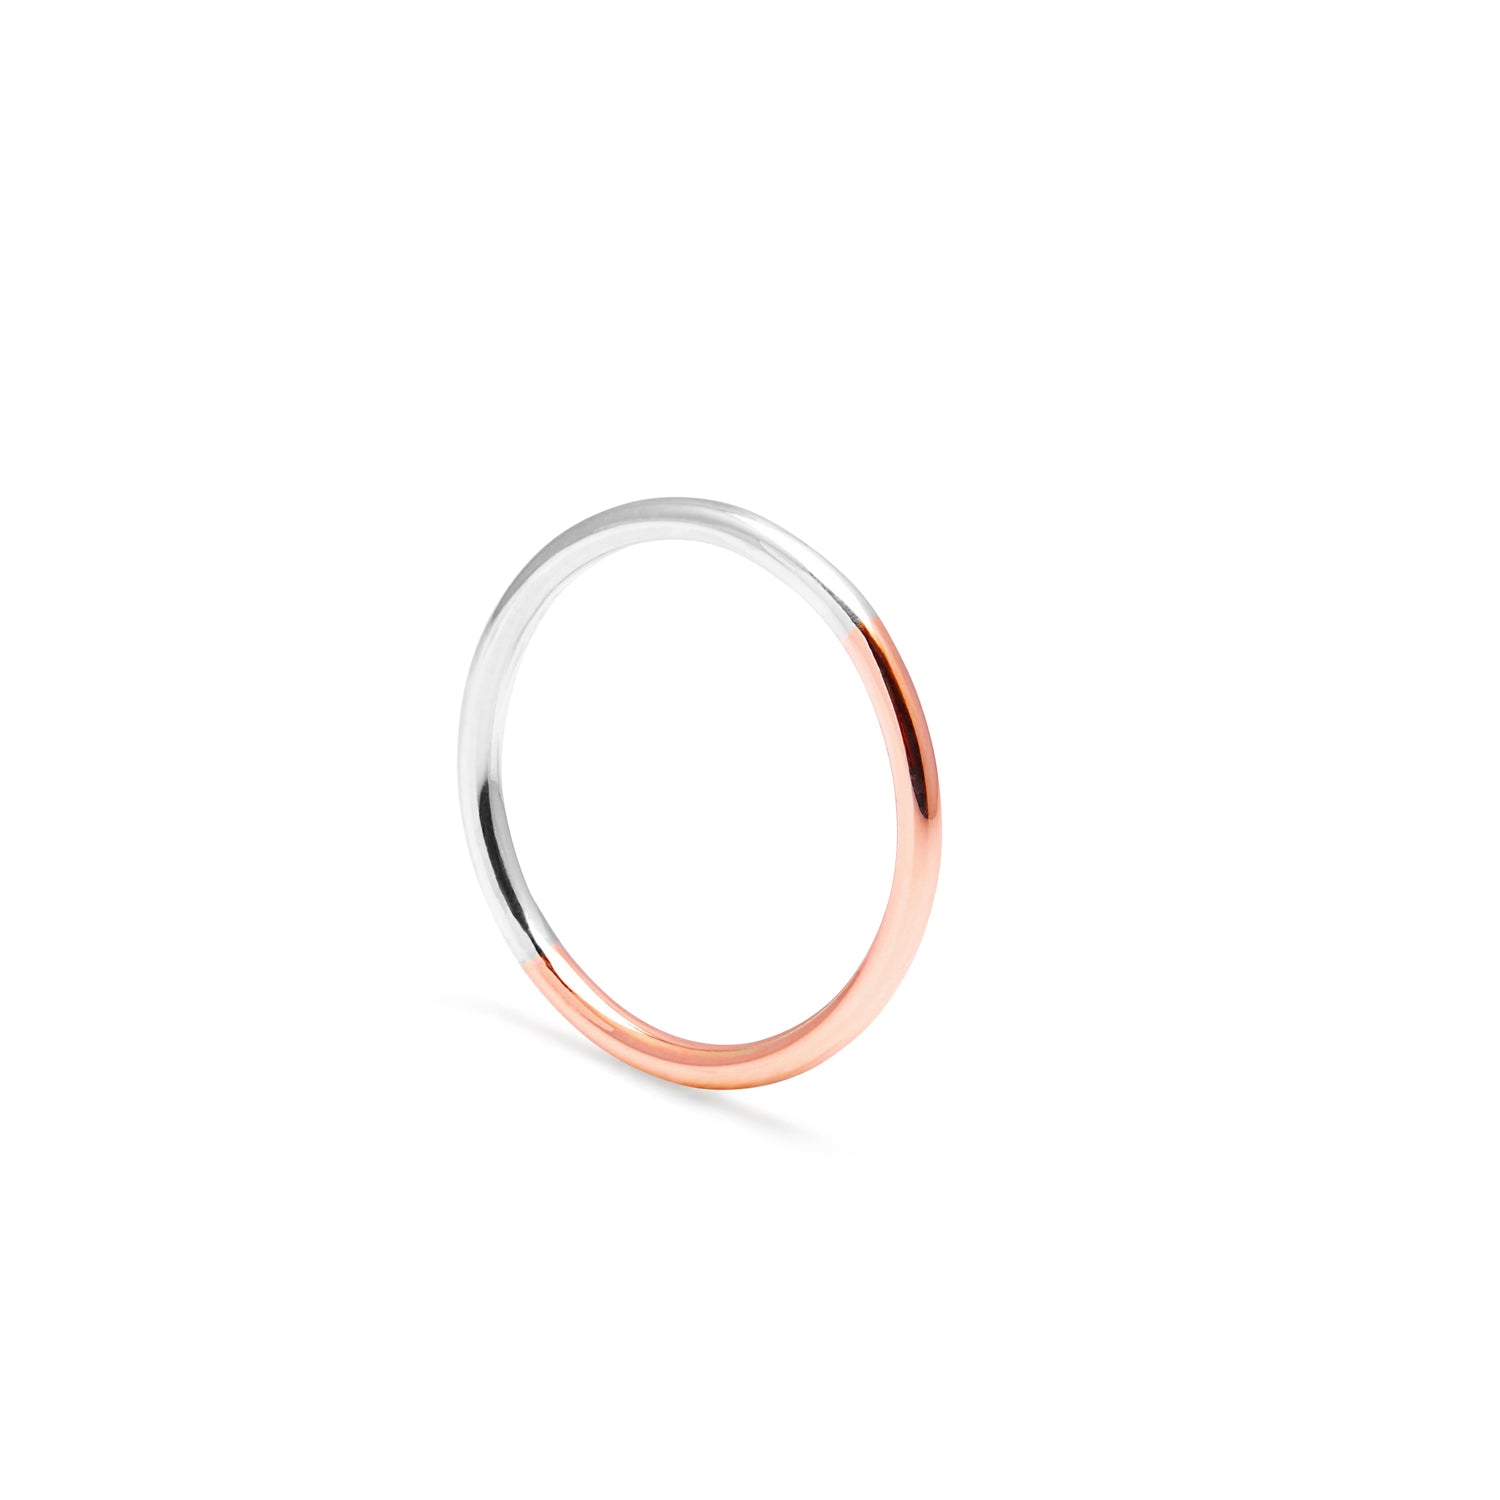 Two-tone Round Ring - 9k Rose Gold & Silver - Myia Bonner Jewellery